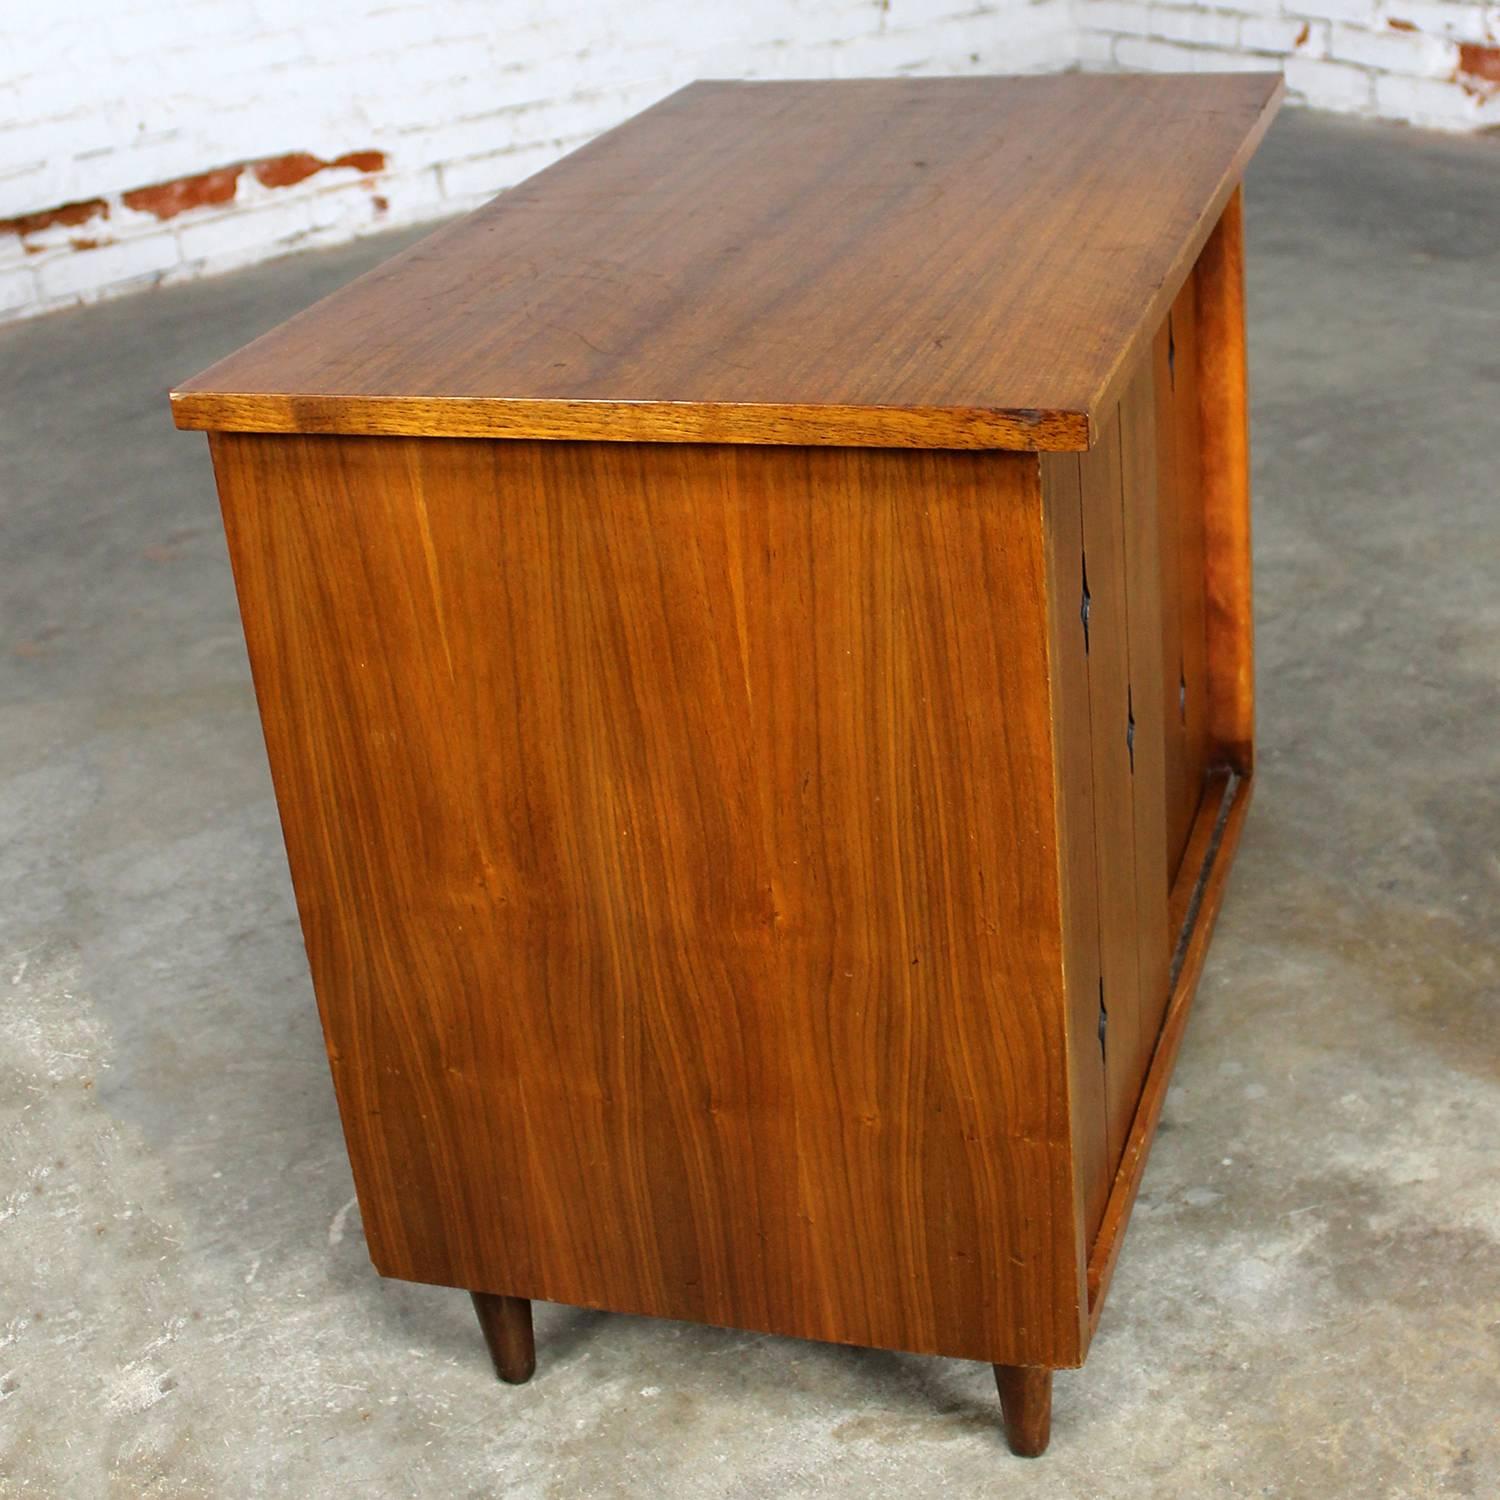 Awesome Mid-Century Modern LP record storage cabinet in walnut with sliding bypass doors. In wonderful vintage condition, circa 1960.

LP’s are back and we know you need this handsome Mid-Century Modern record storage cabinet for your collection.